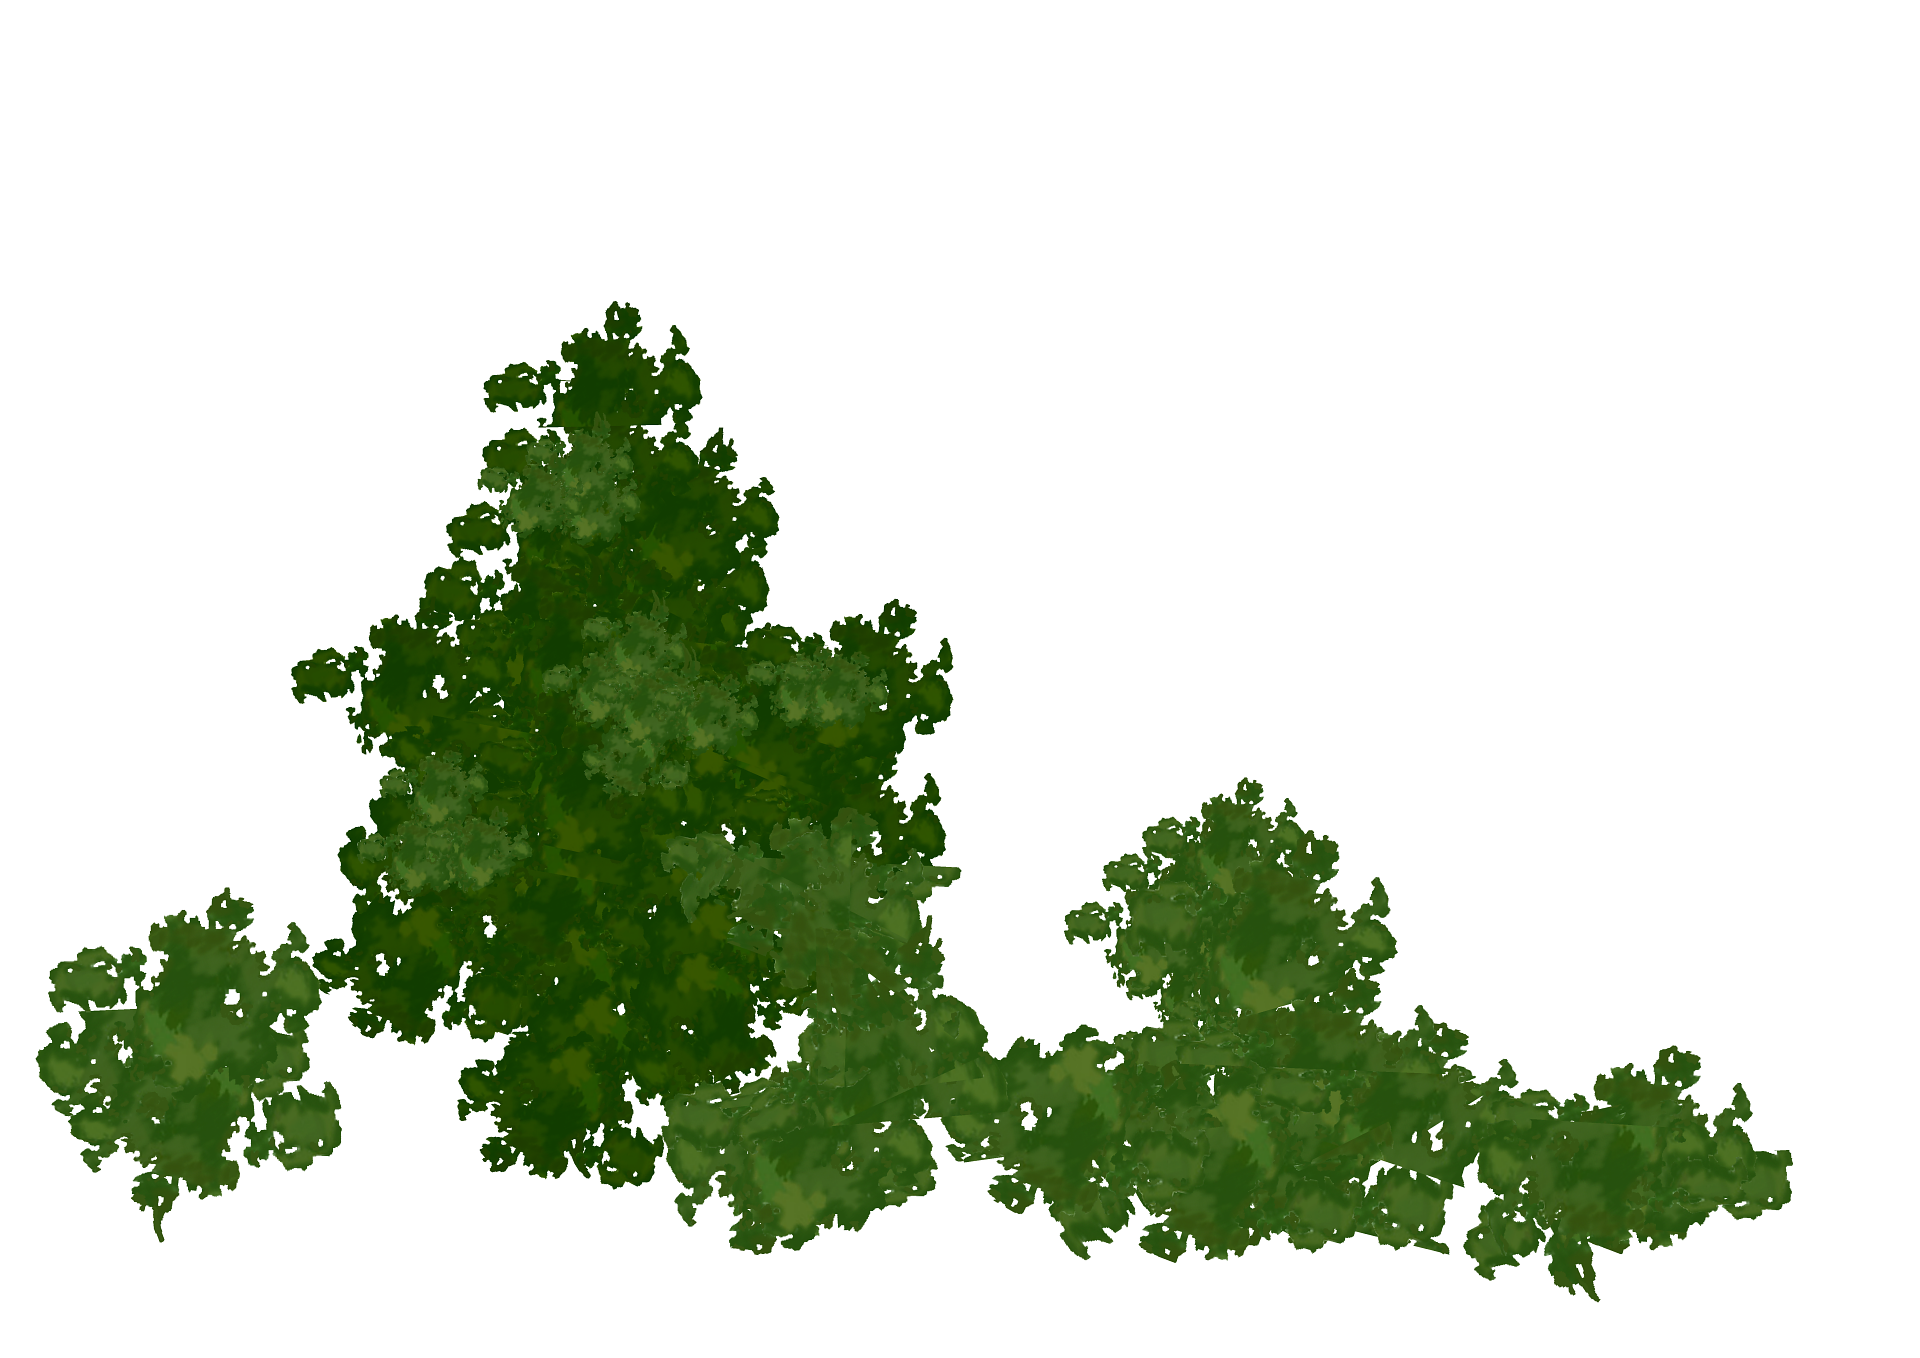 _Tree_001.png